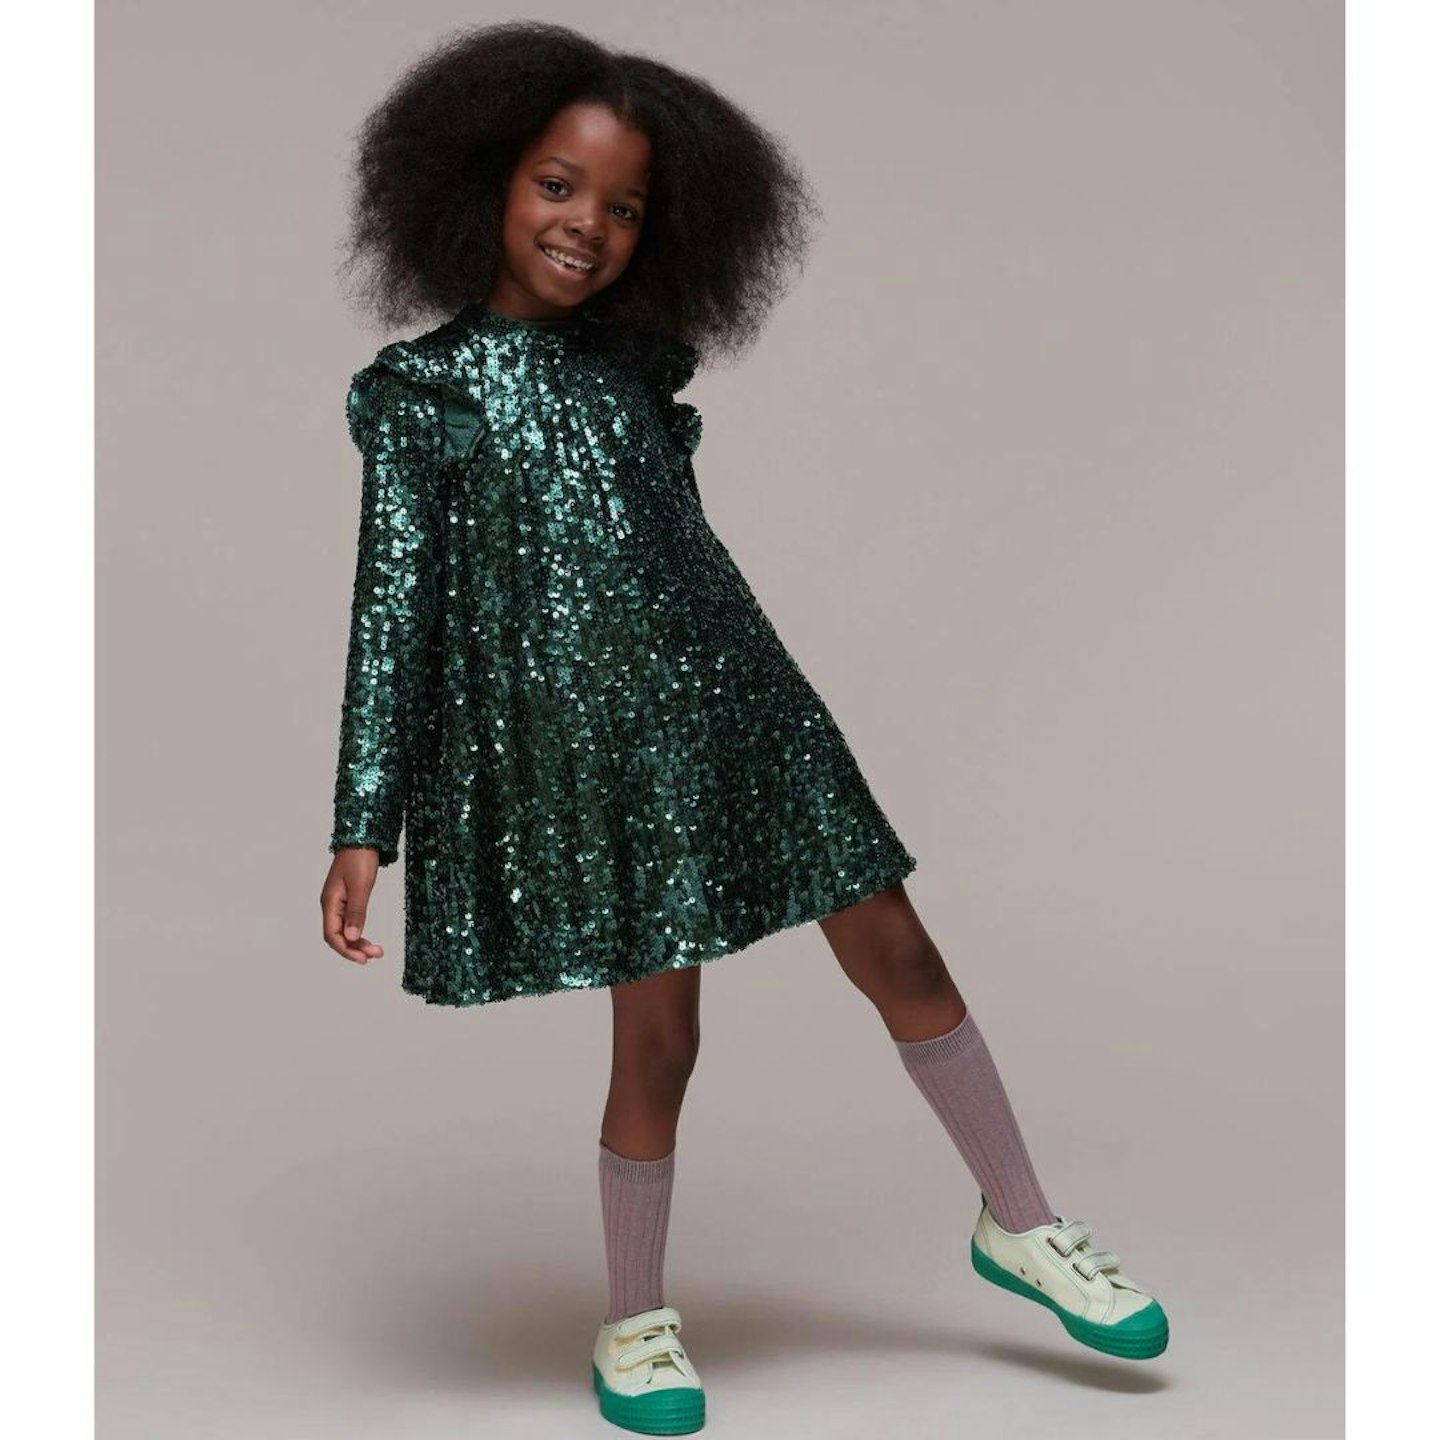 Best Christmas Day Outfits For Kids: Alma Sequin Dress